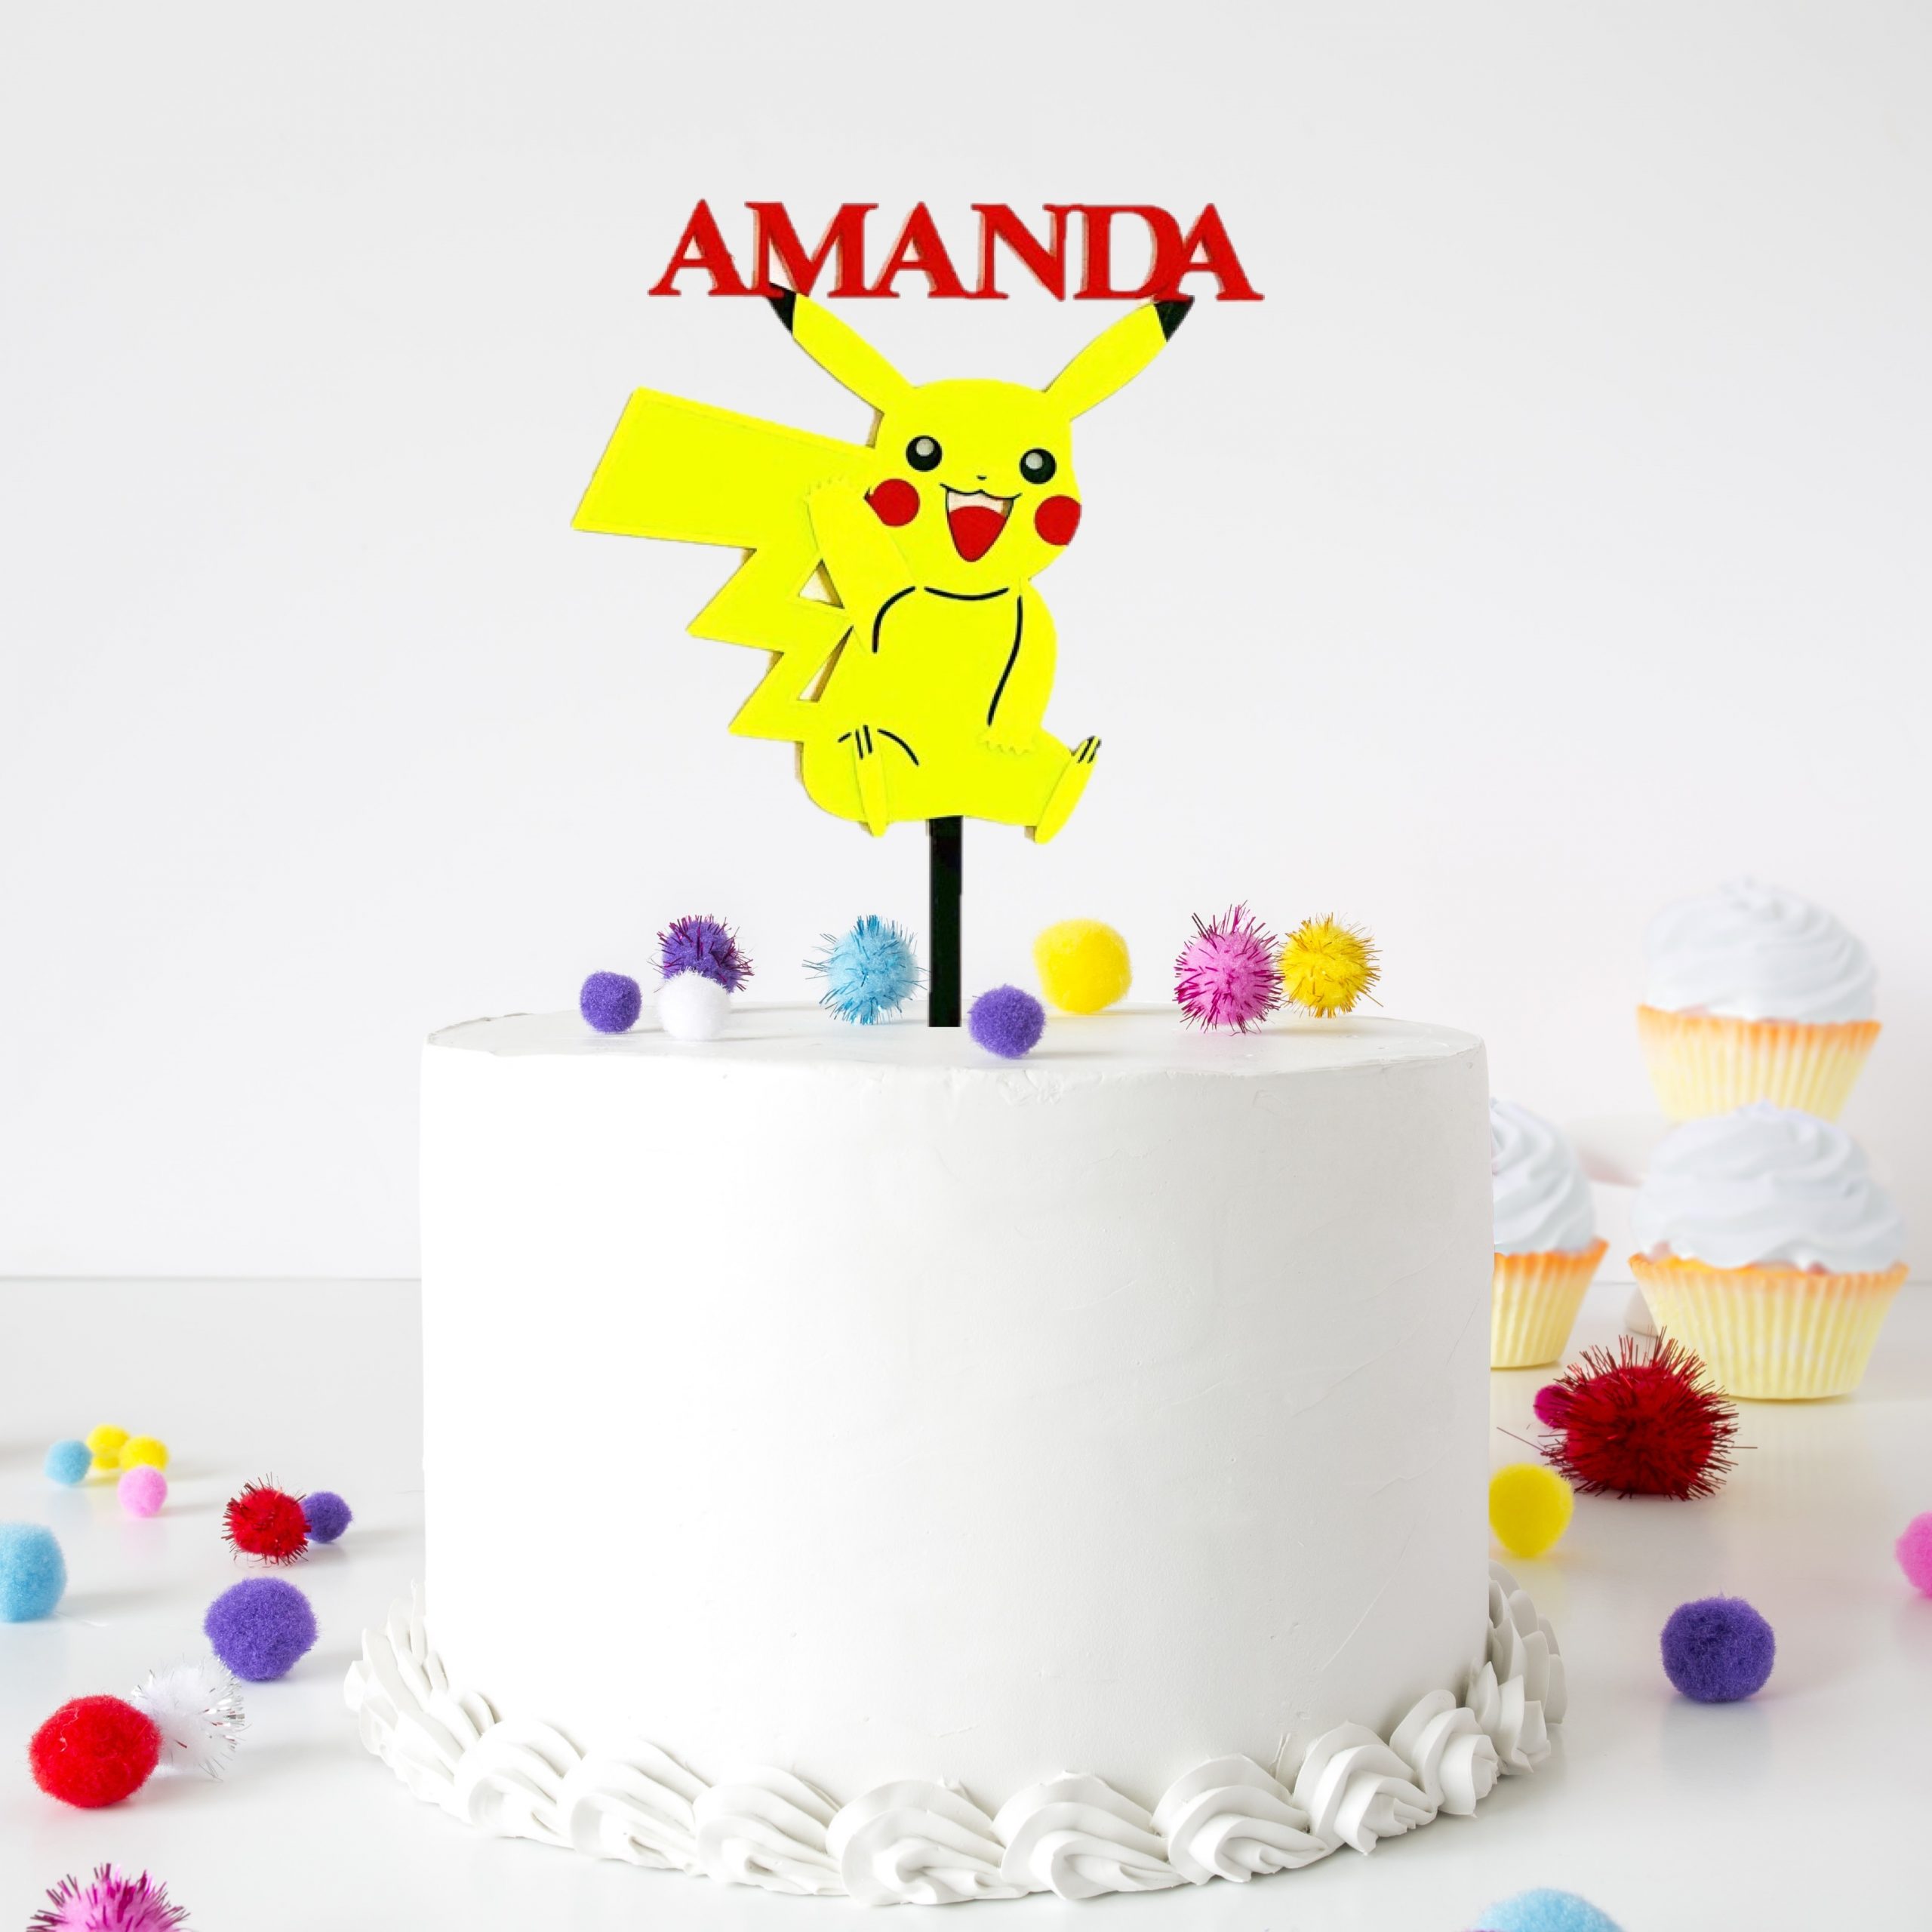 Pokemon, Pikachu and Others Etc Birthday Cake Topper Display unofficial 